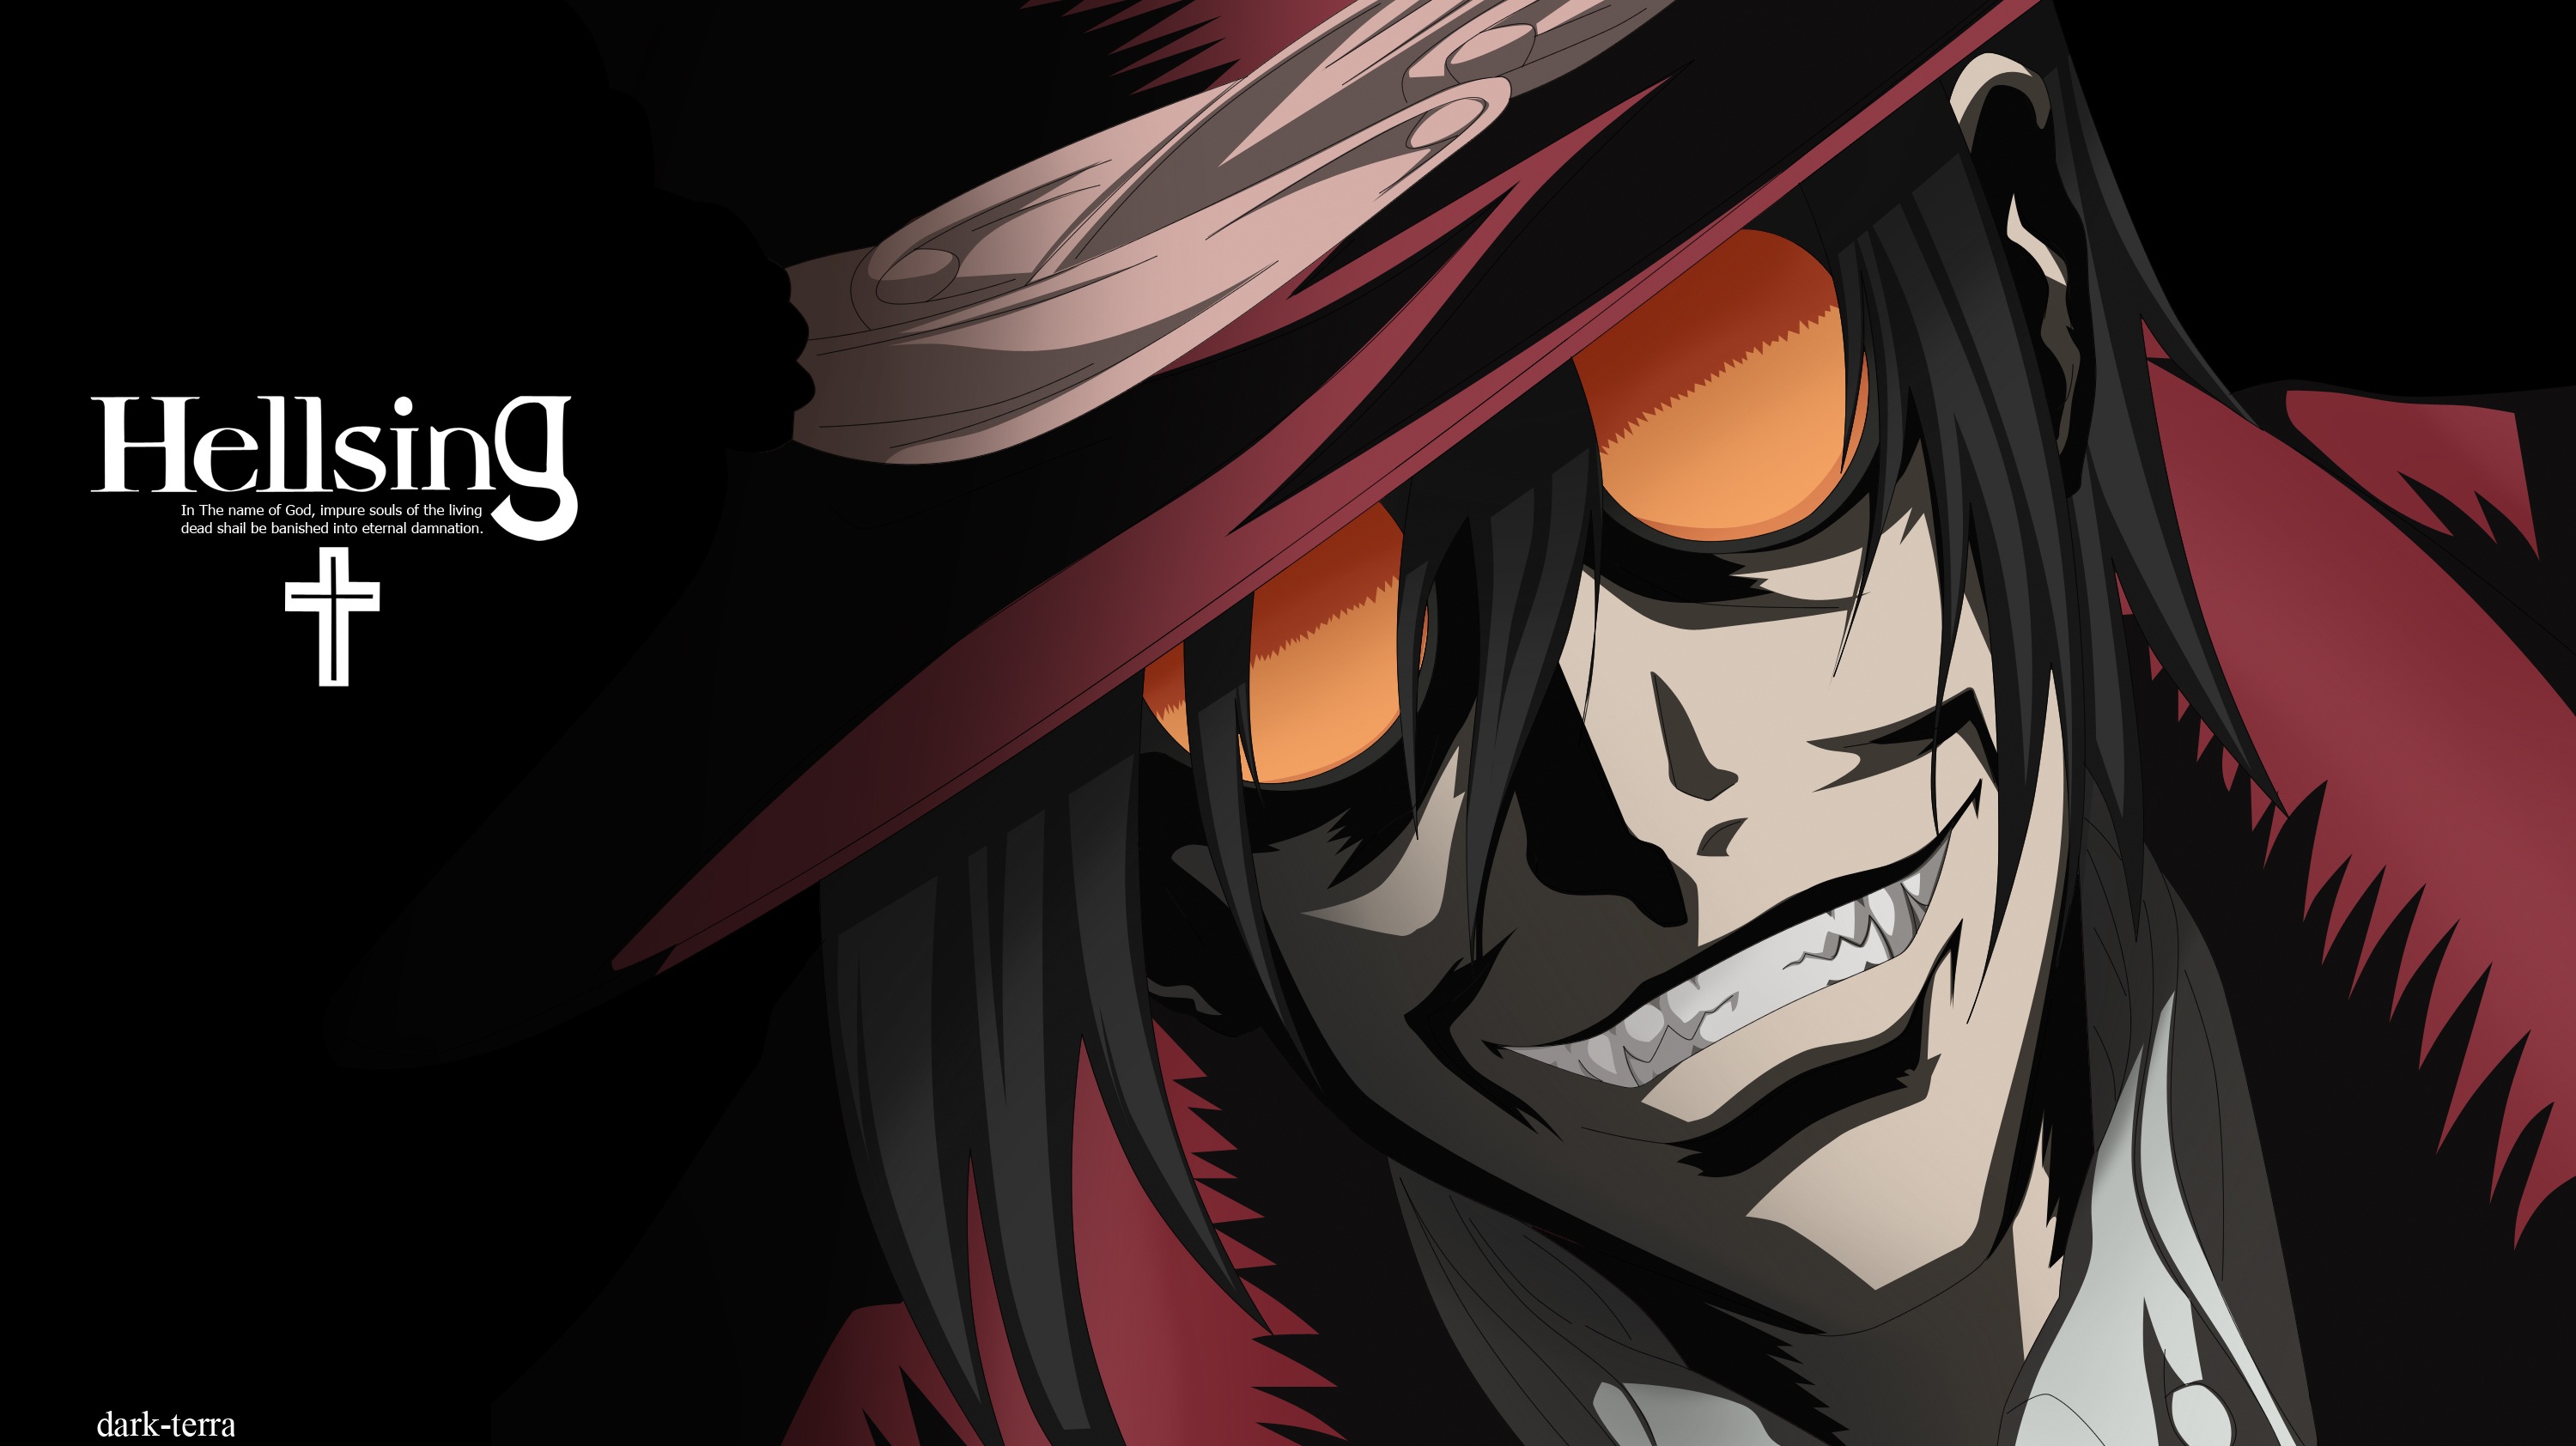 ALUCARD  The Ultimate Overpowered Character  YouTube